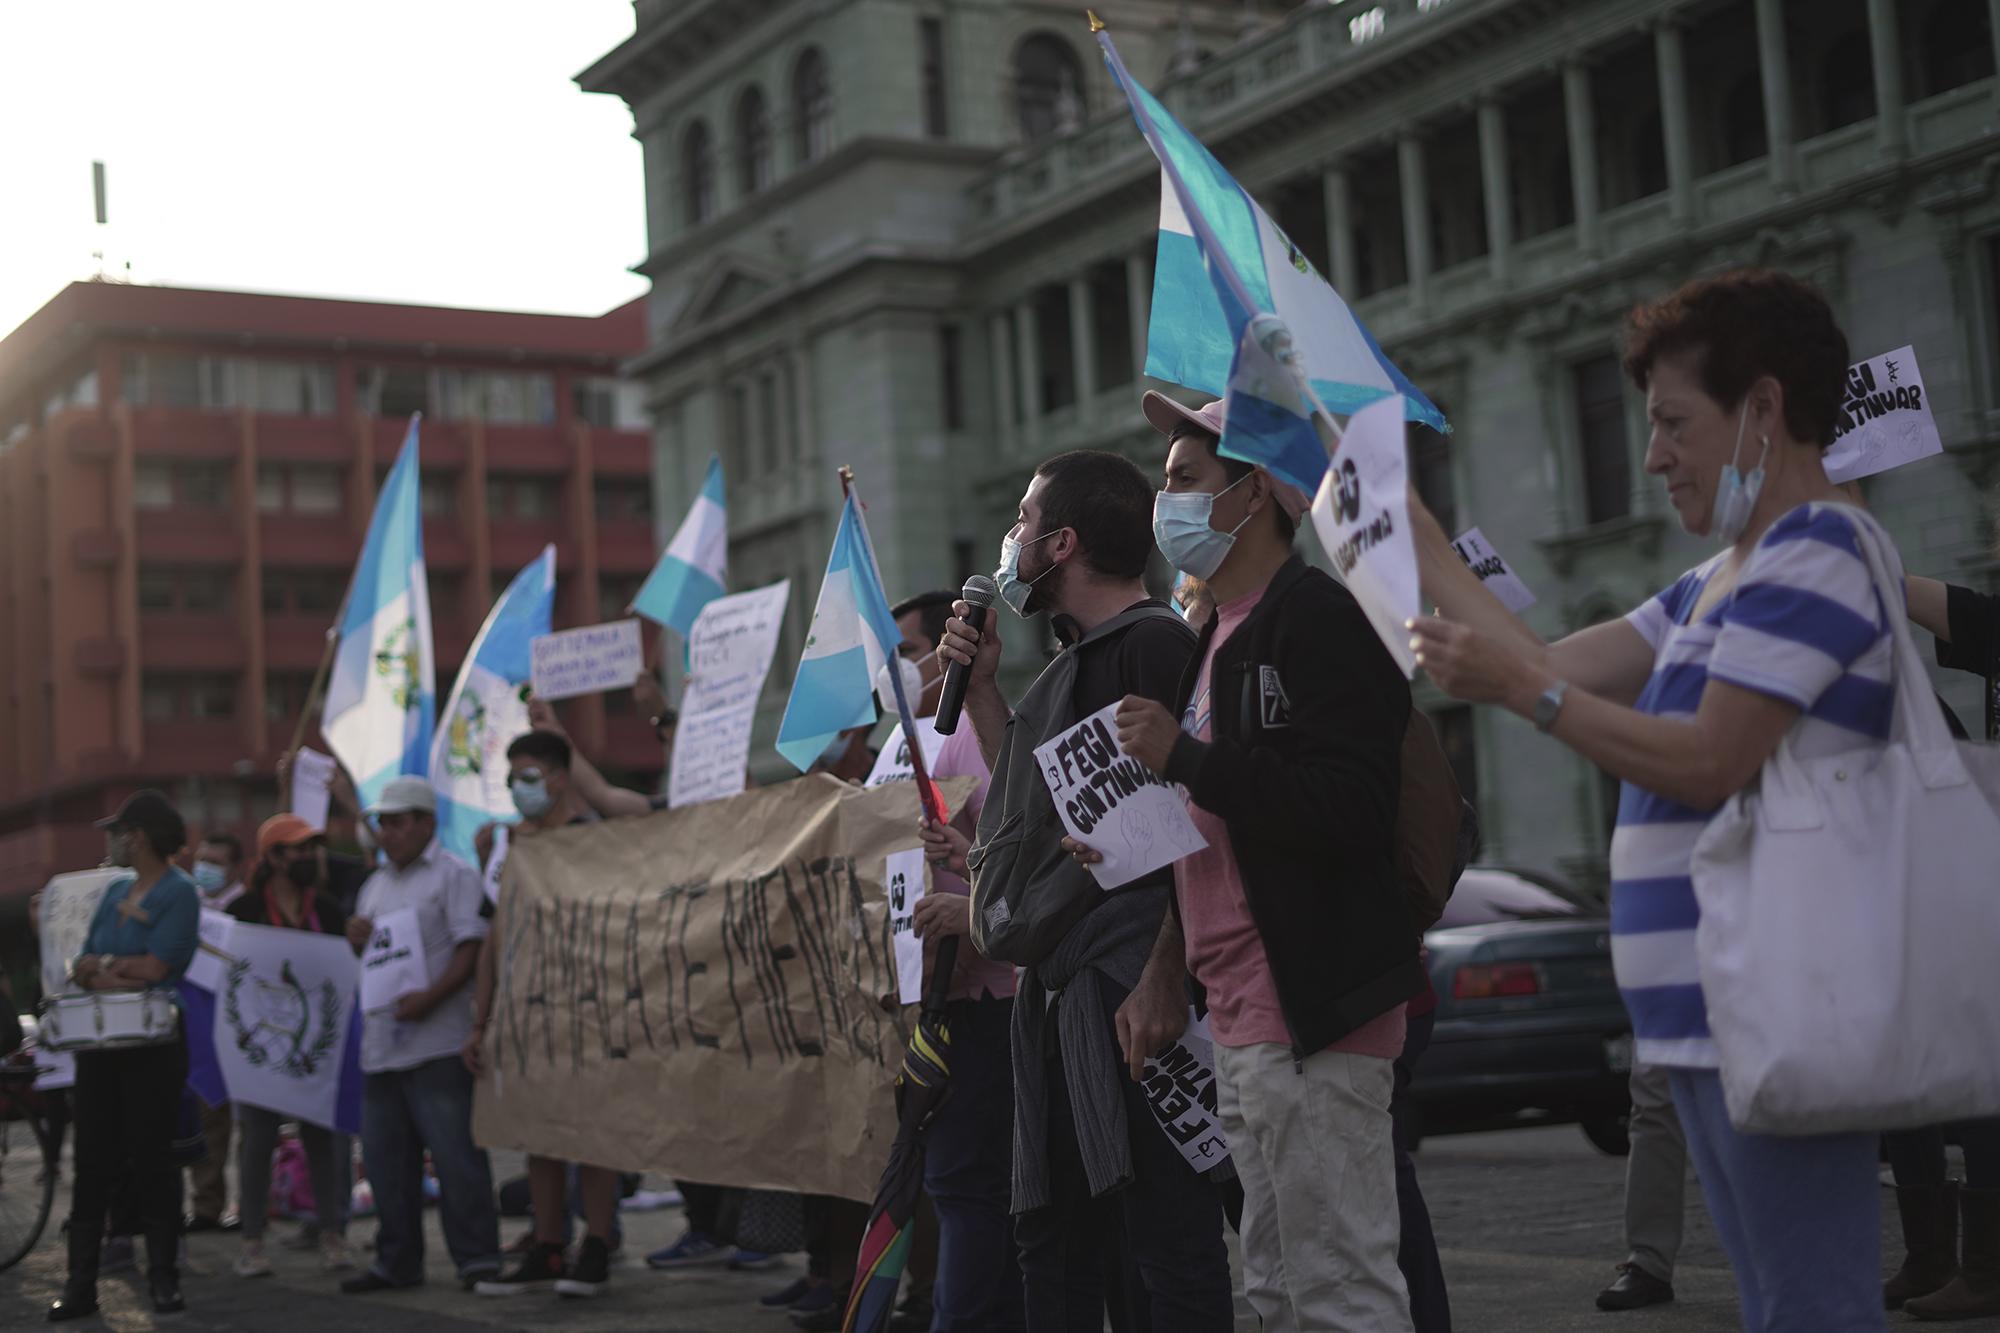 On June 5, 2021, a day before U.S. Vice President Kamala Harris’s visit to Guatemala, a group of citizens protested against President Alejandro Giammettei, who took office in January 2020. “Kamala, they’re lying to you” was a slogan of the protest. Photo: Víctor Peña/El Faro